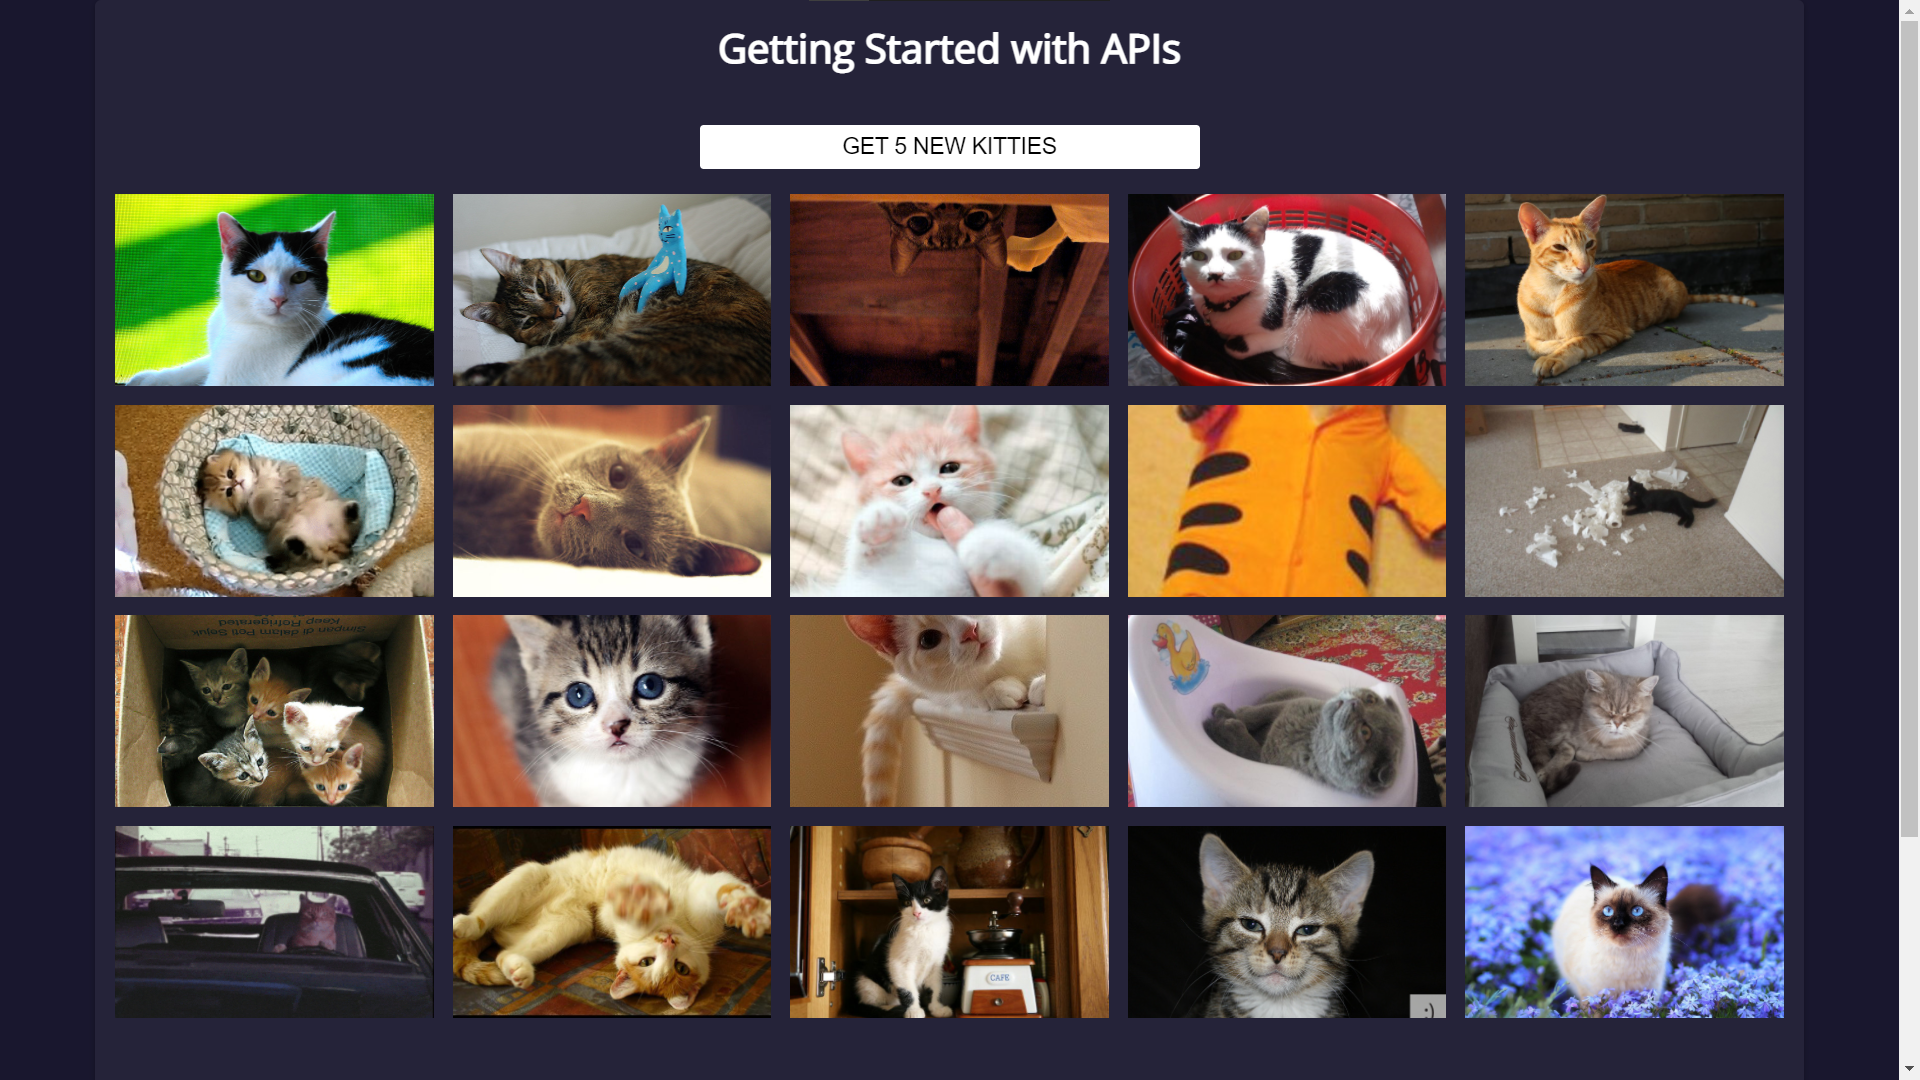 Getting Started with APIs